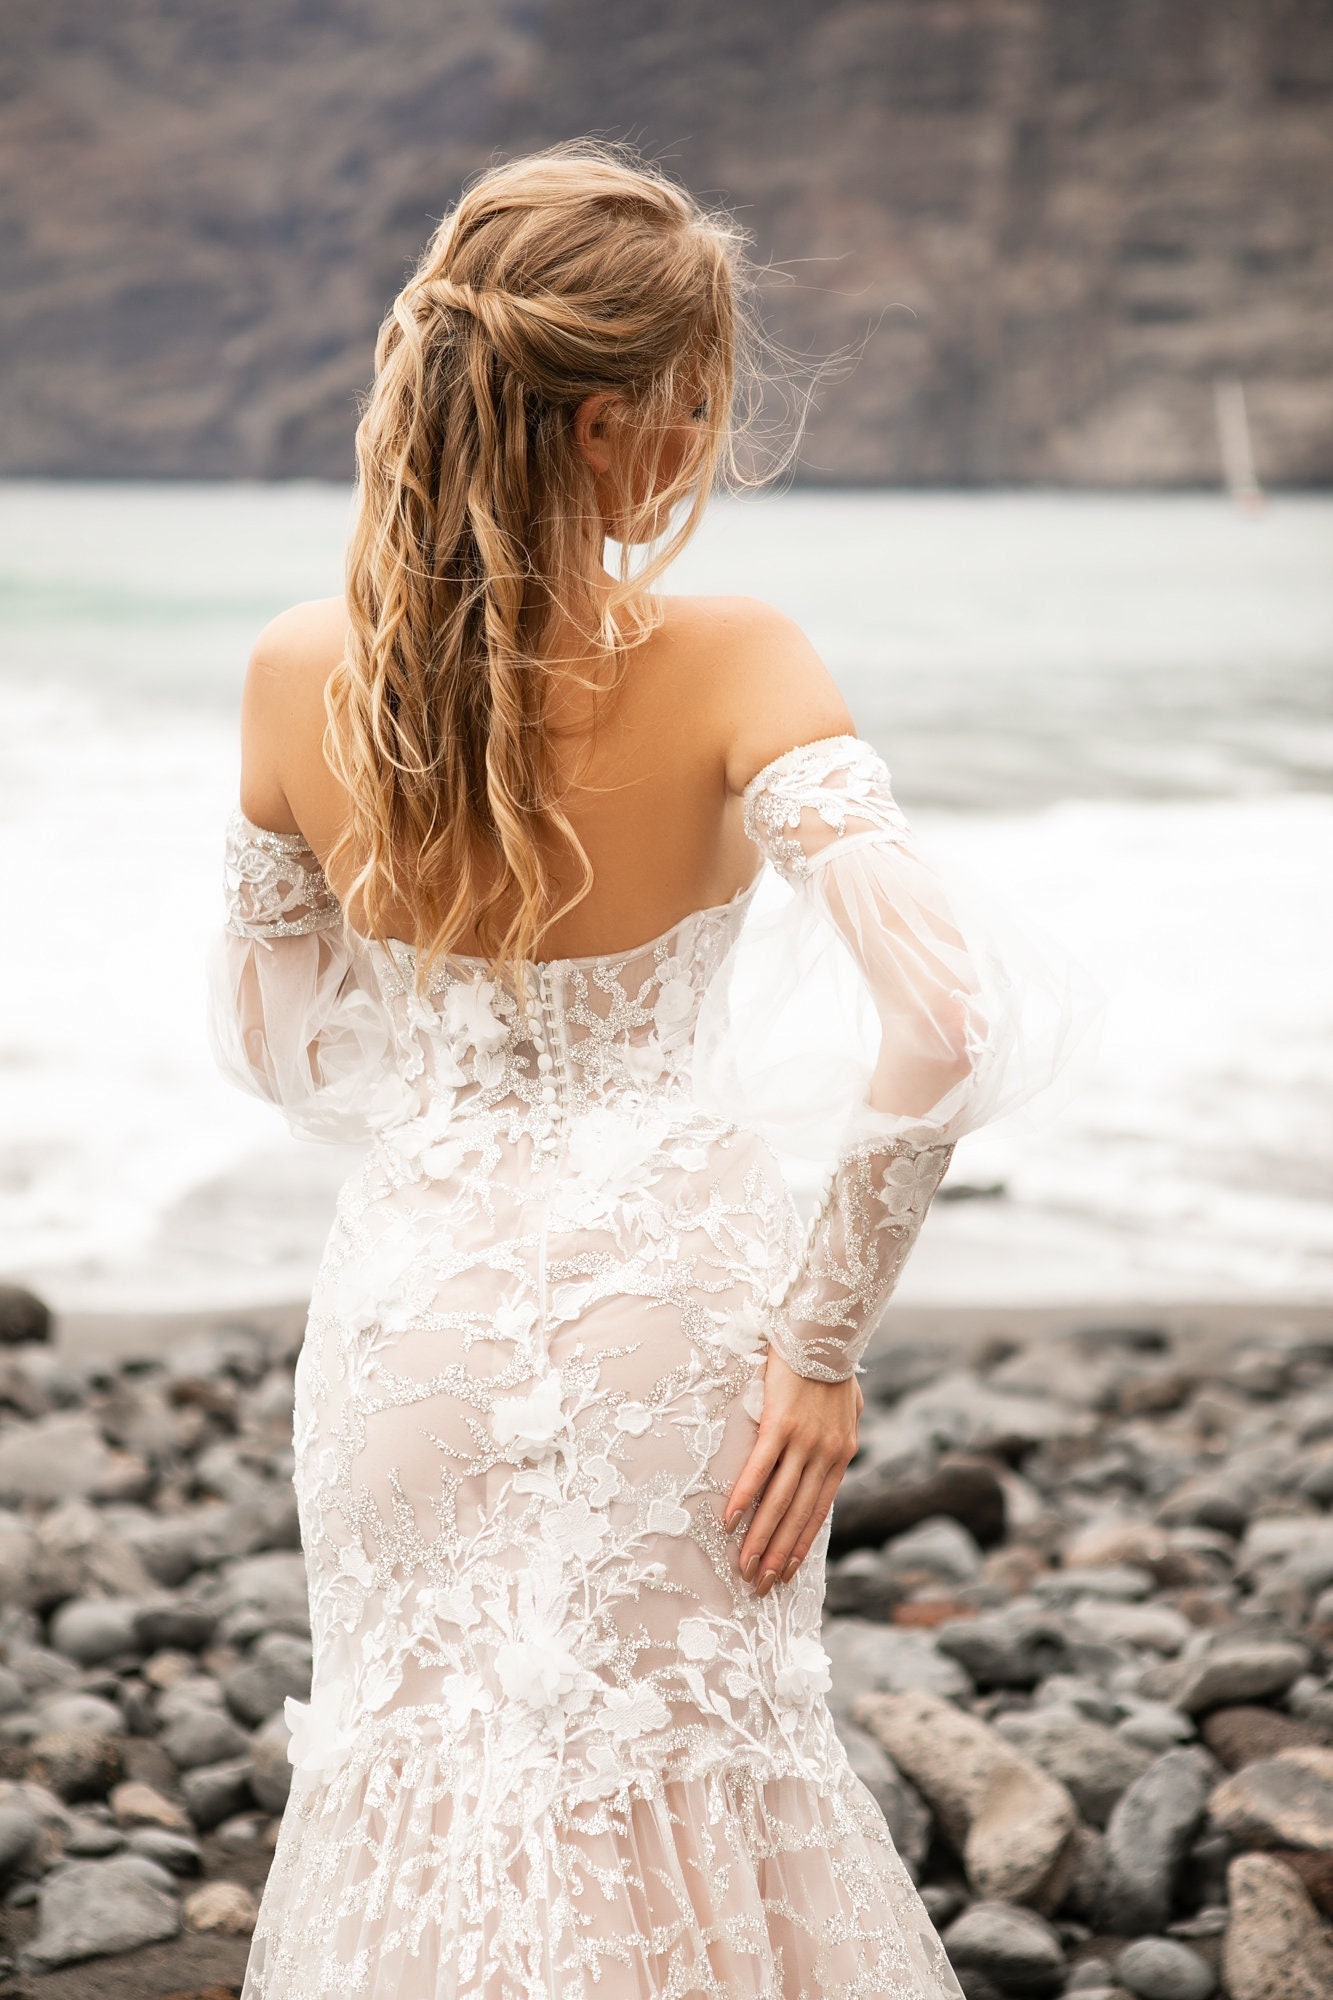 Sexy Wedding Dress in Lace With Detached Long Sleeve Mermaid Bridal Gown  Sheer Corset Top Beach Ocean Bridal Dress HEDERA 